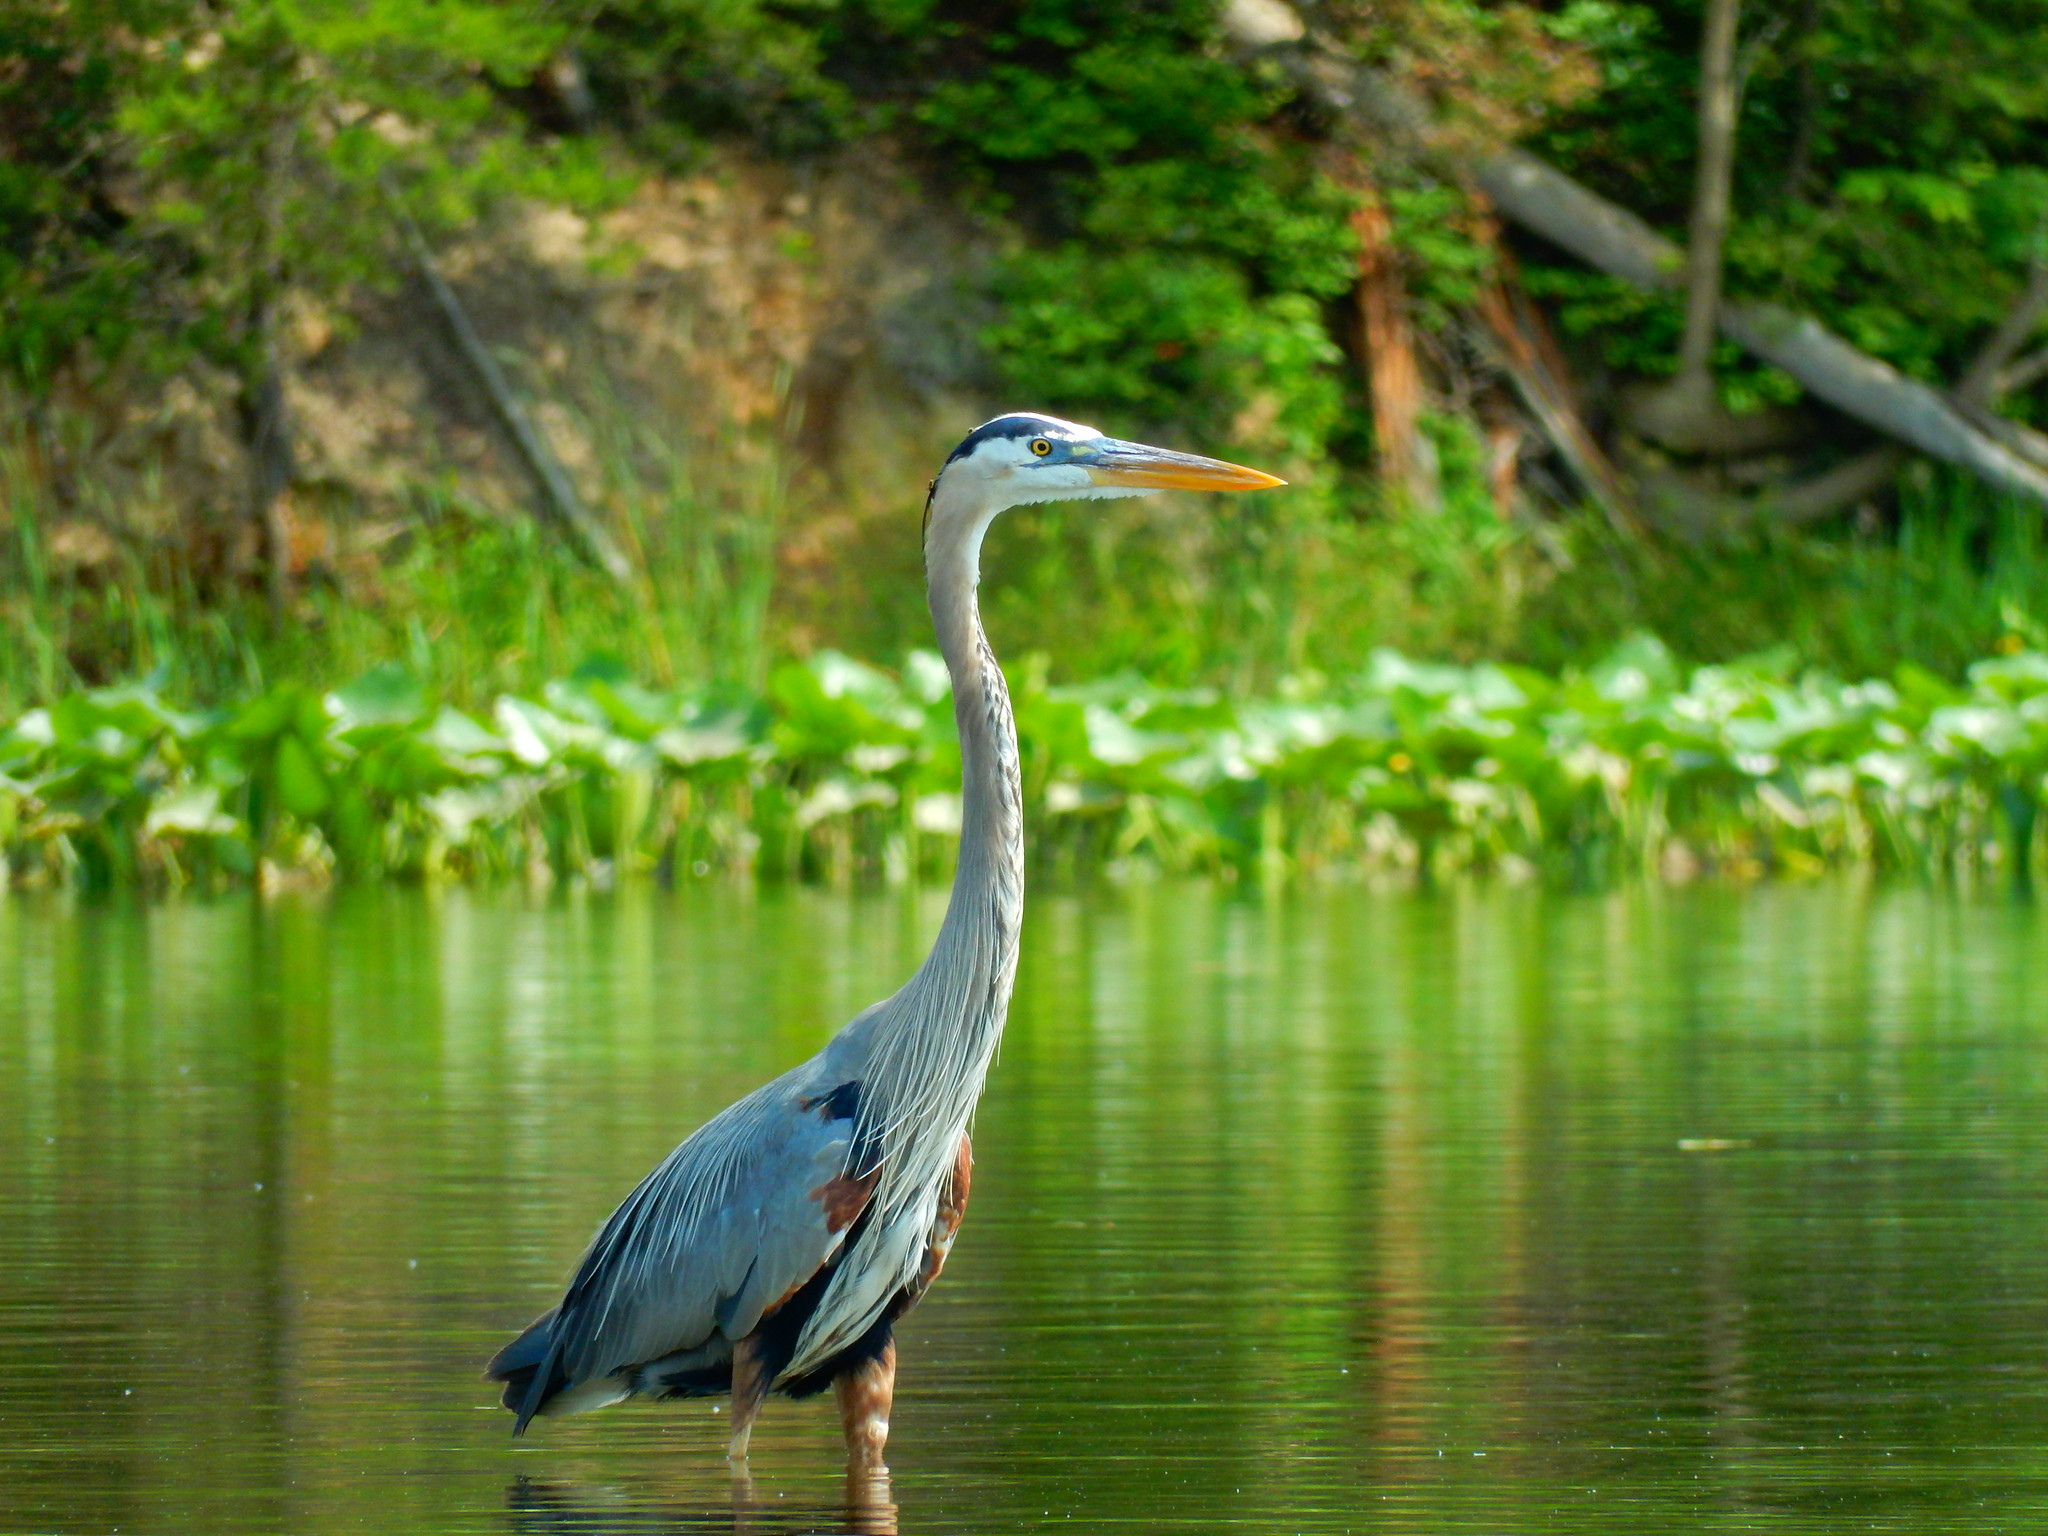 A Great Blue Heron standing in the marshy waters at Mason Neck State Park with bright greenery foliage in the background.